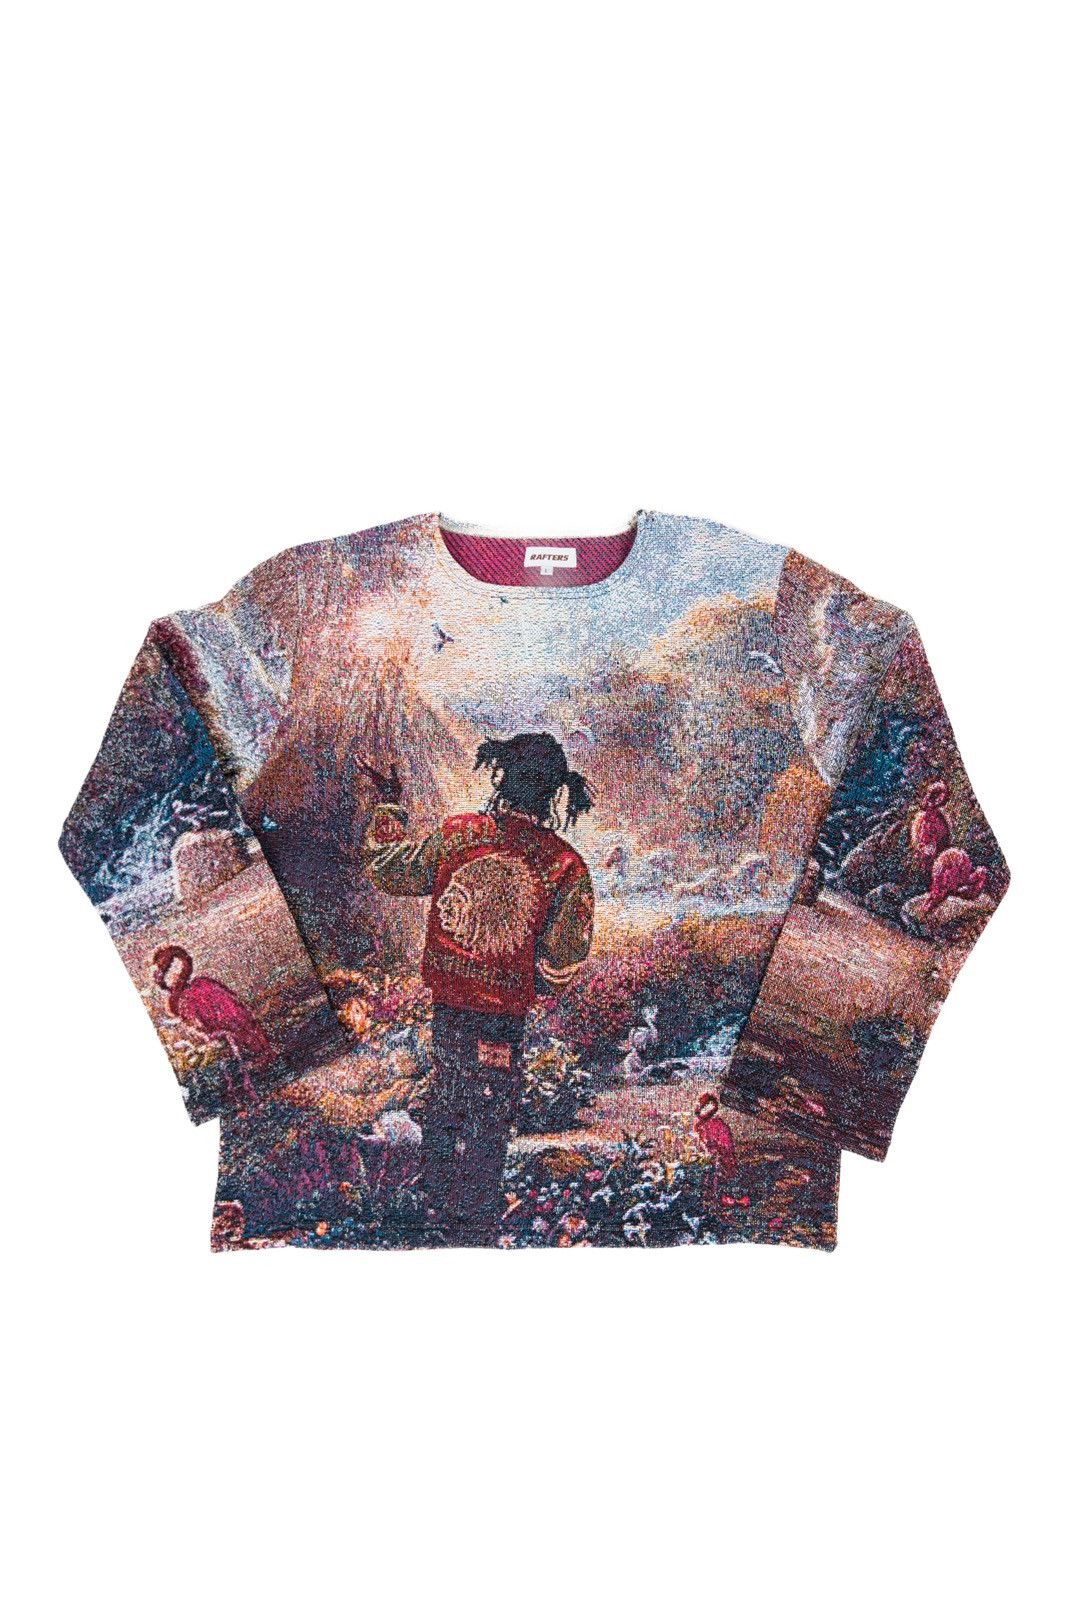 Vintage Chief Keef Vintage Woven Tapestry Style Sweater | Grailed